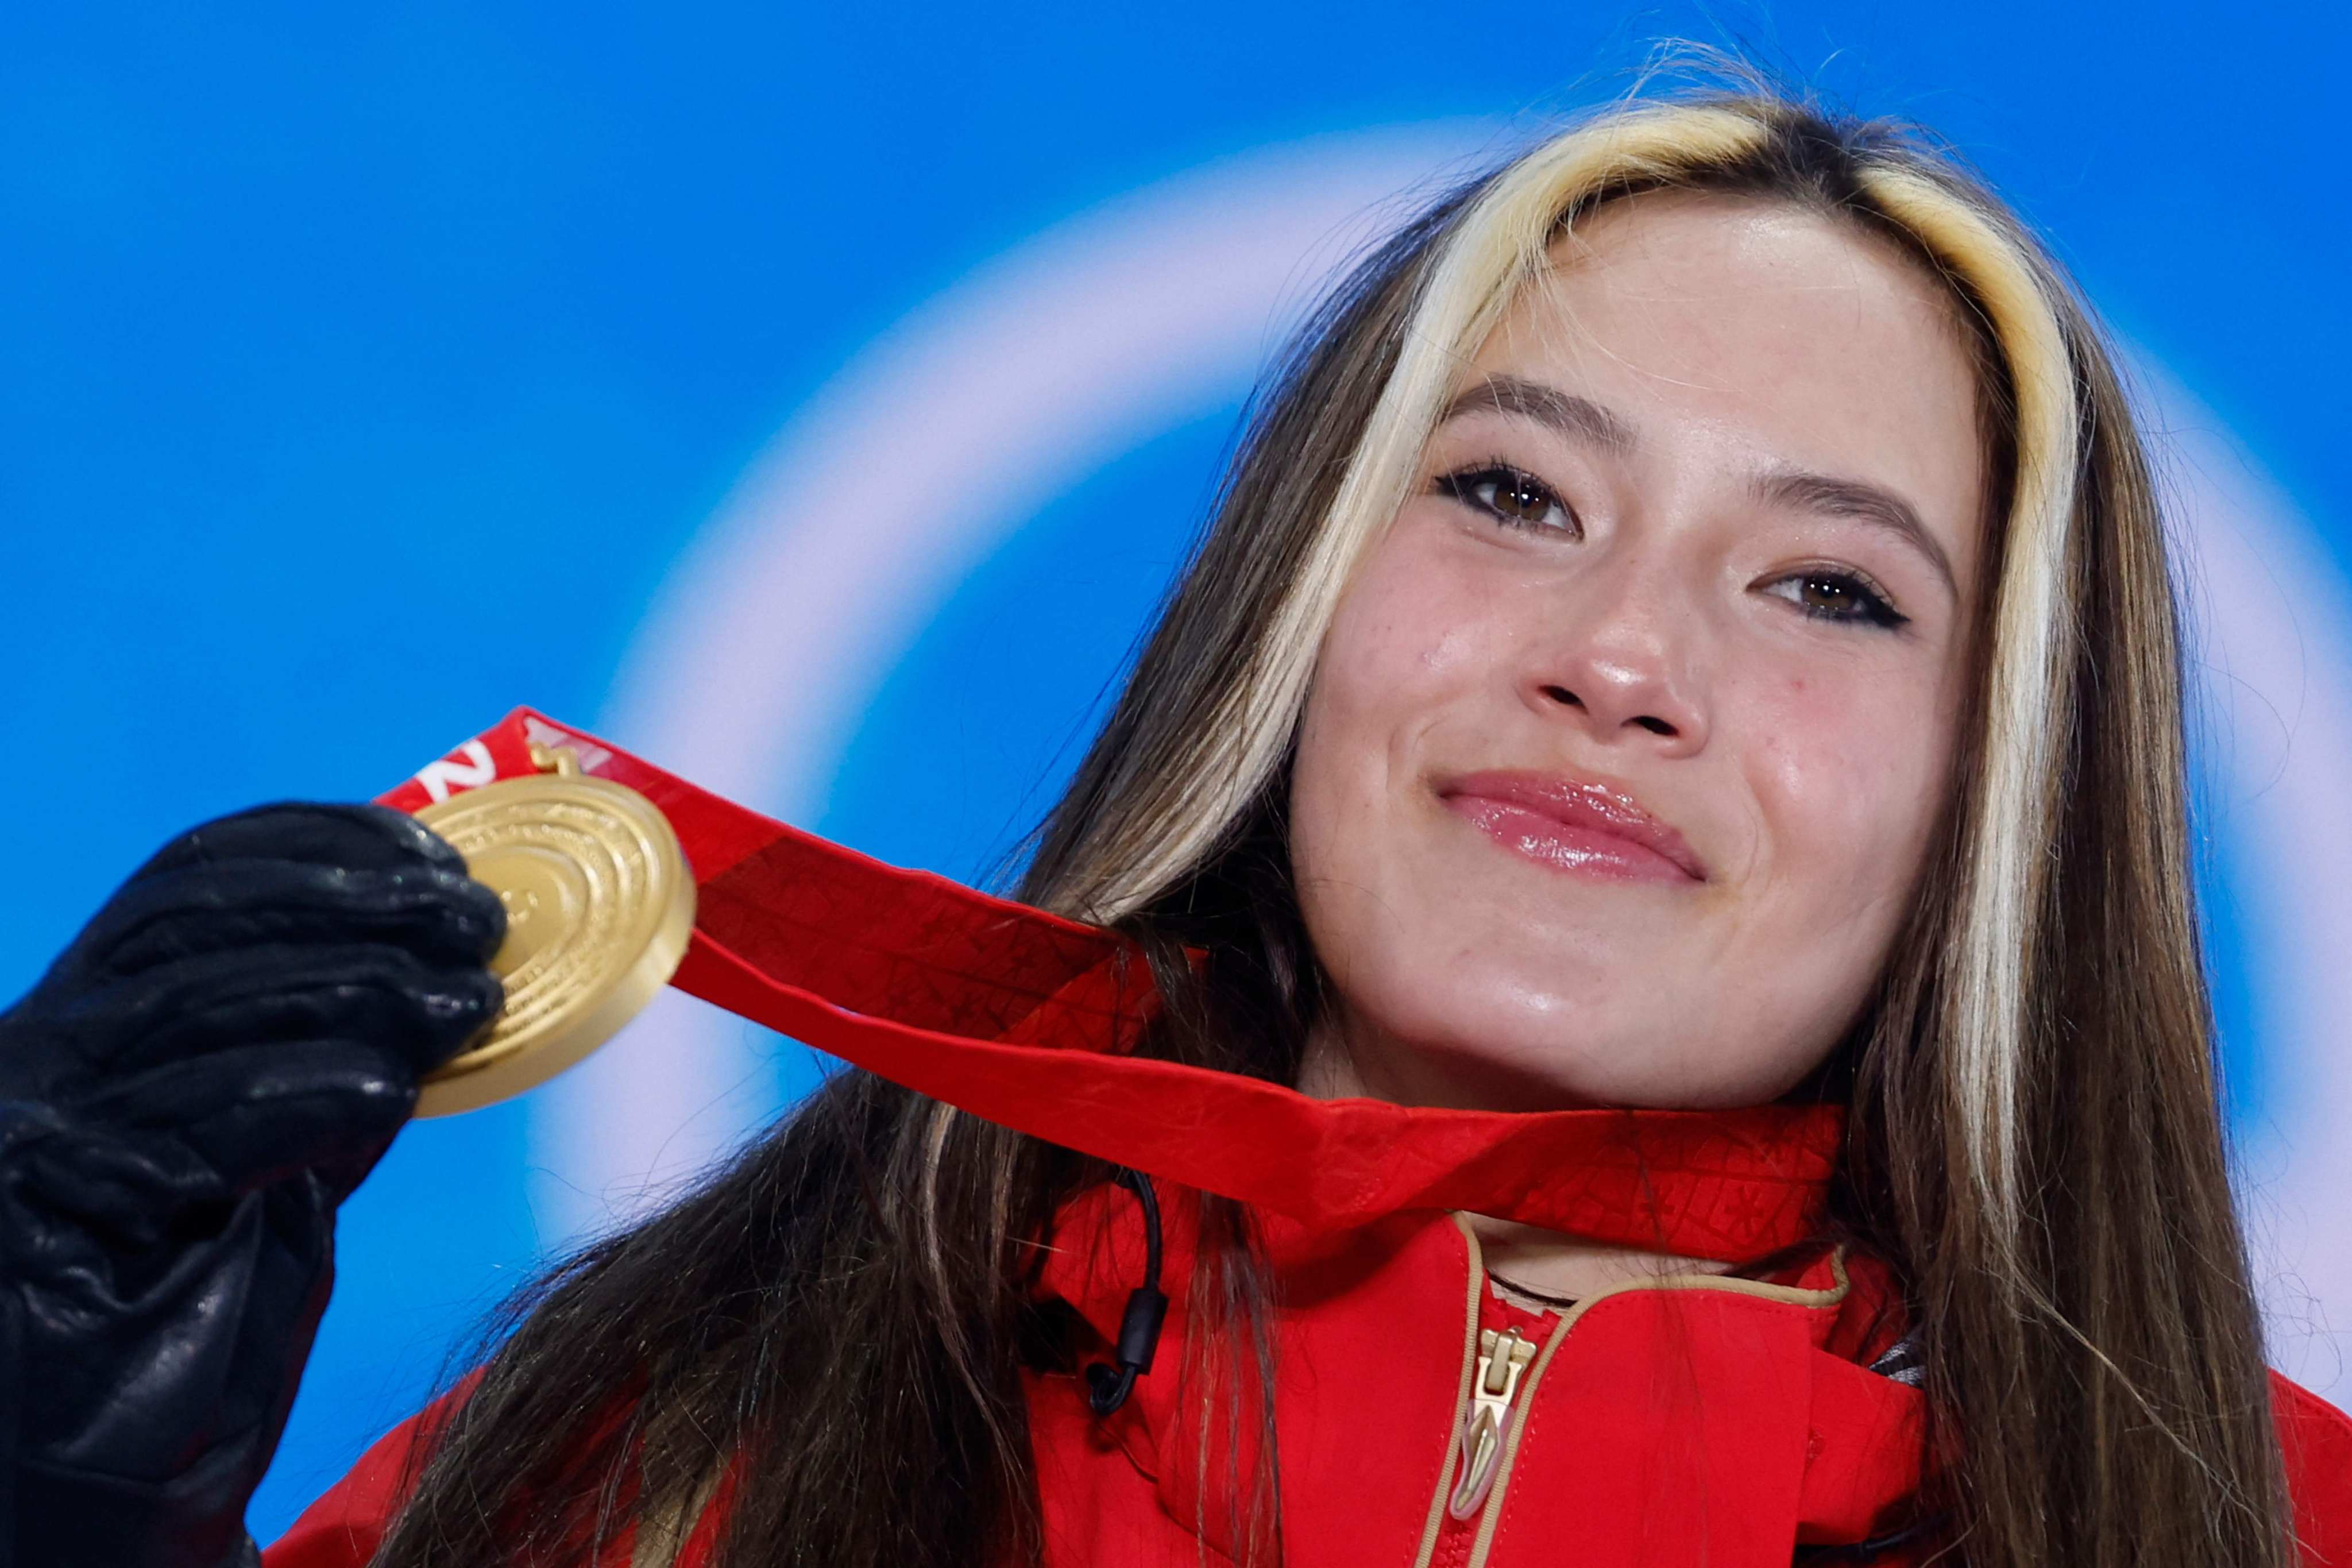 Eileen Gu holds up her gold medal during the women’s freeski halfpipe victory ceremony at the Beijing 2022 Winter Olympics in Zhangjiakou on February 18. Photo: AFP